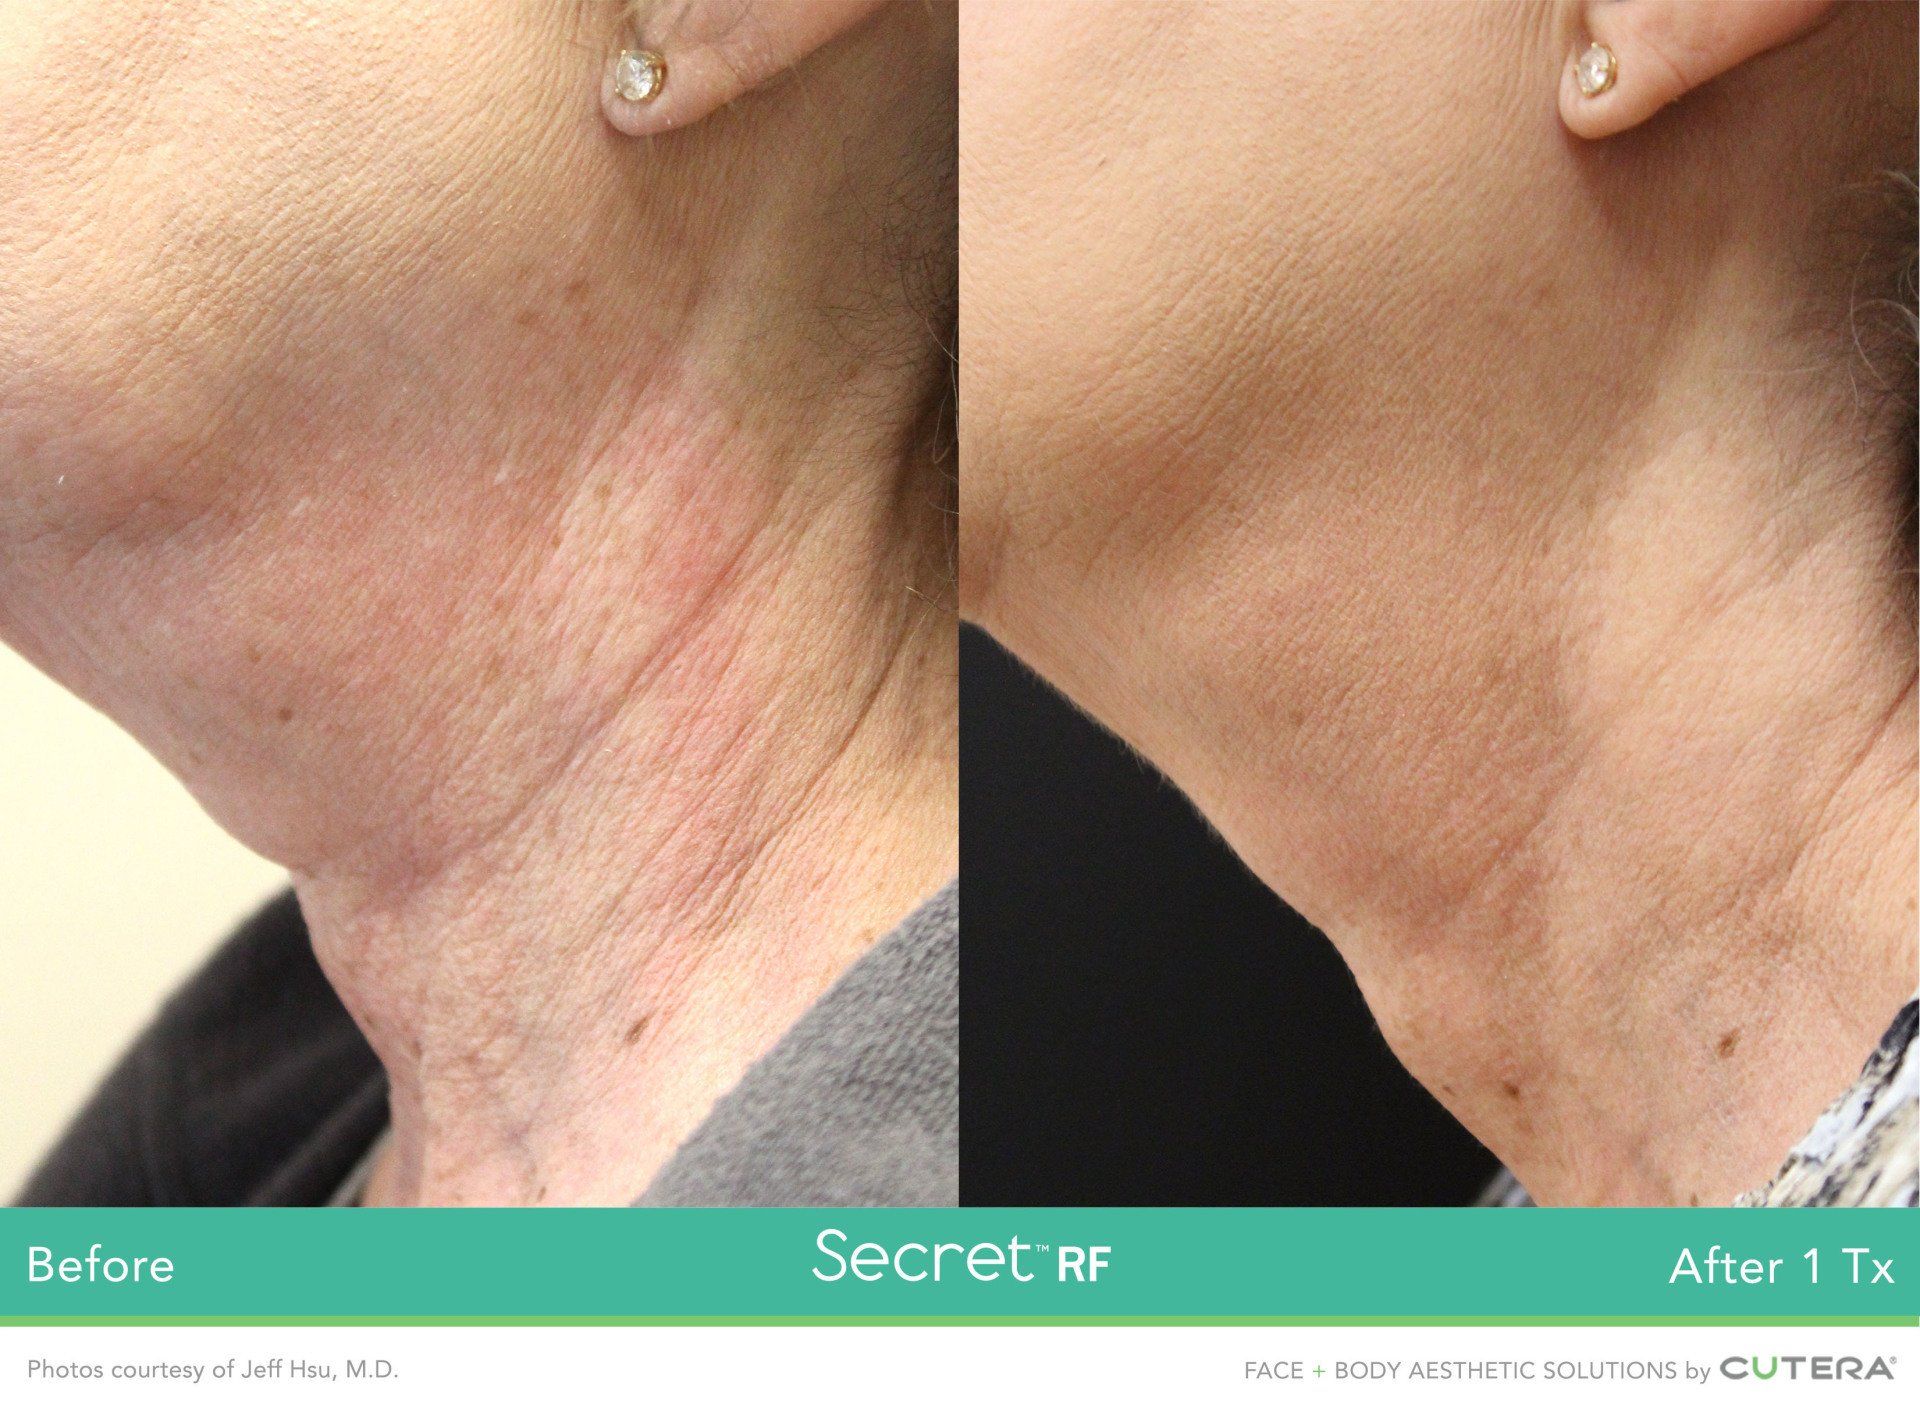 Photo of a clients neck before and after Secret RF